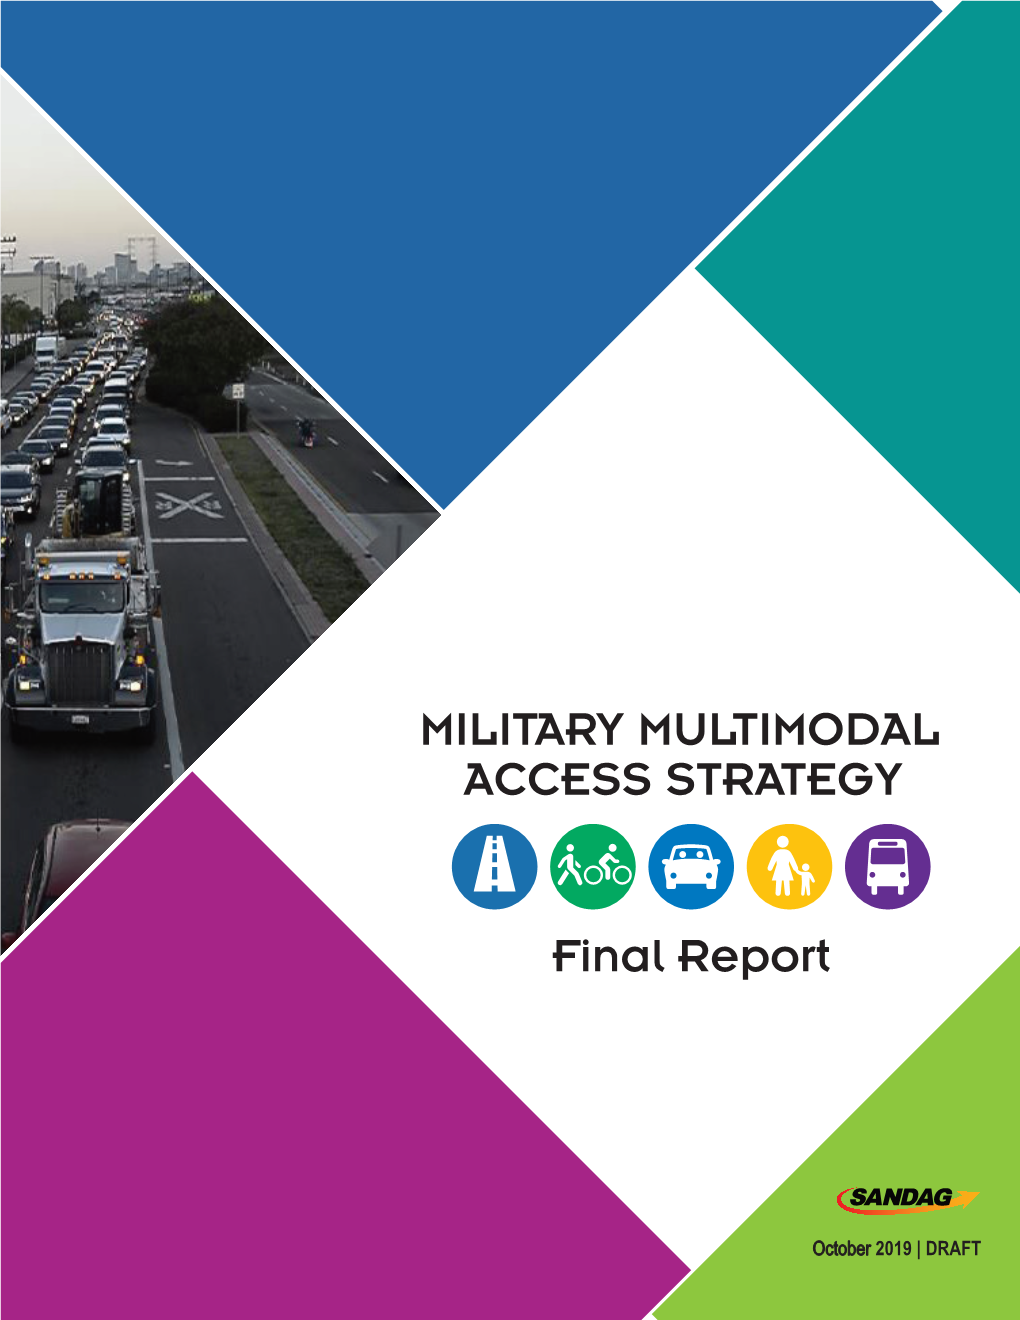 MILITARY MULTIMODAL ACCESS STRATEGY Final Report